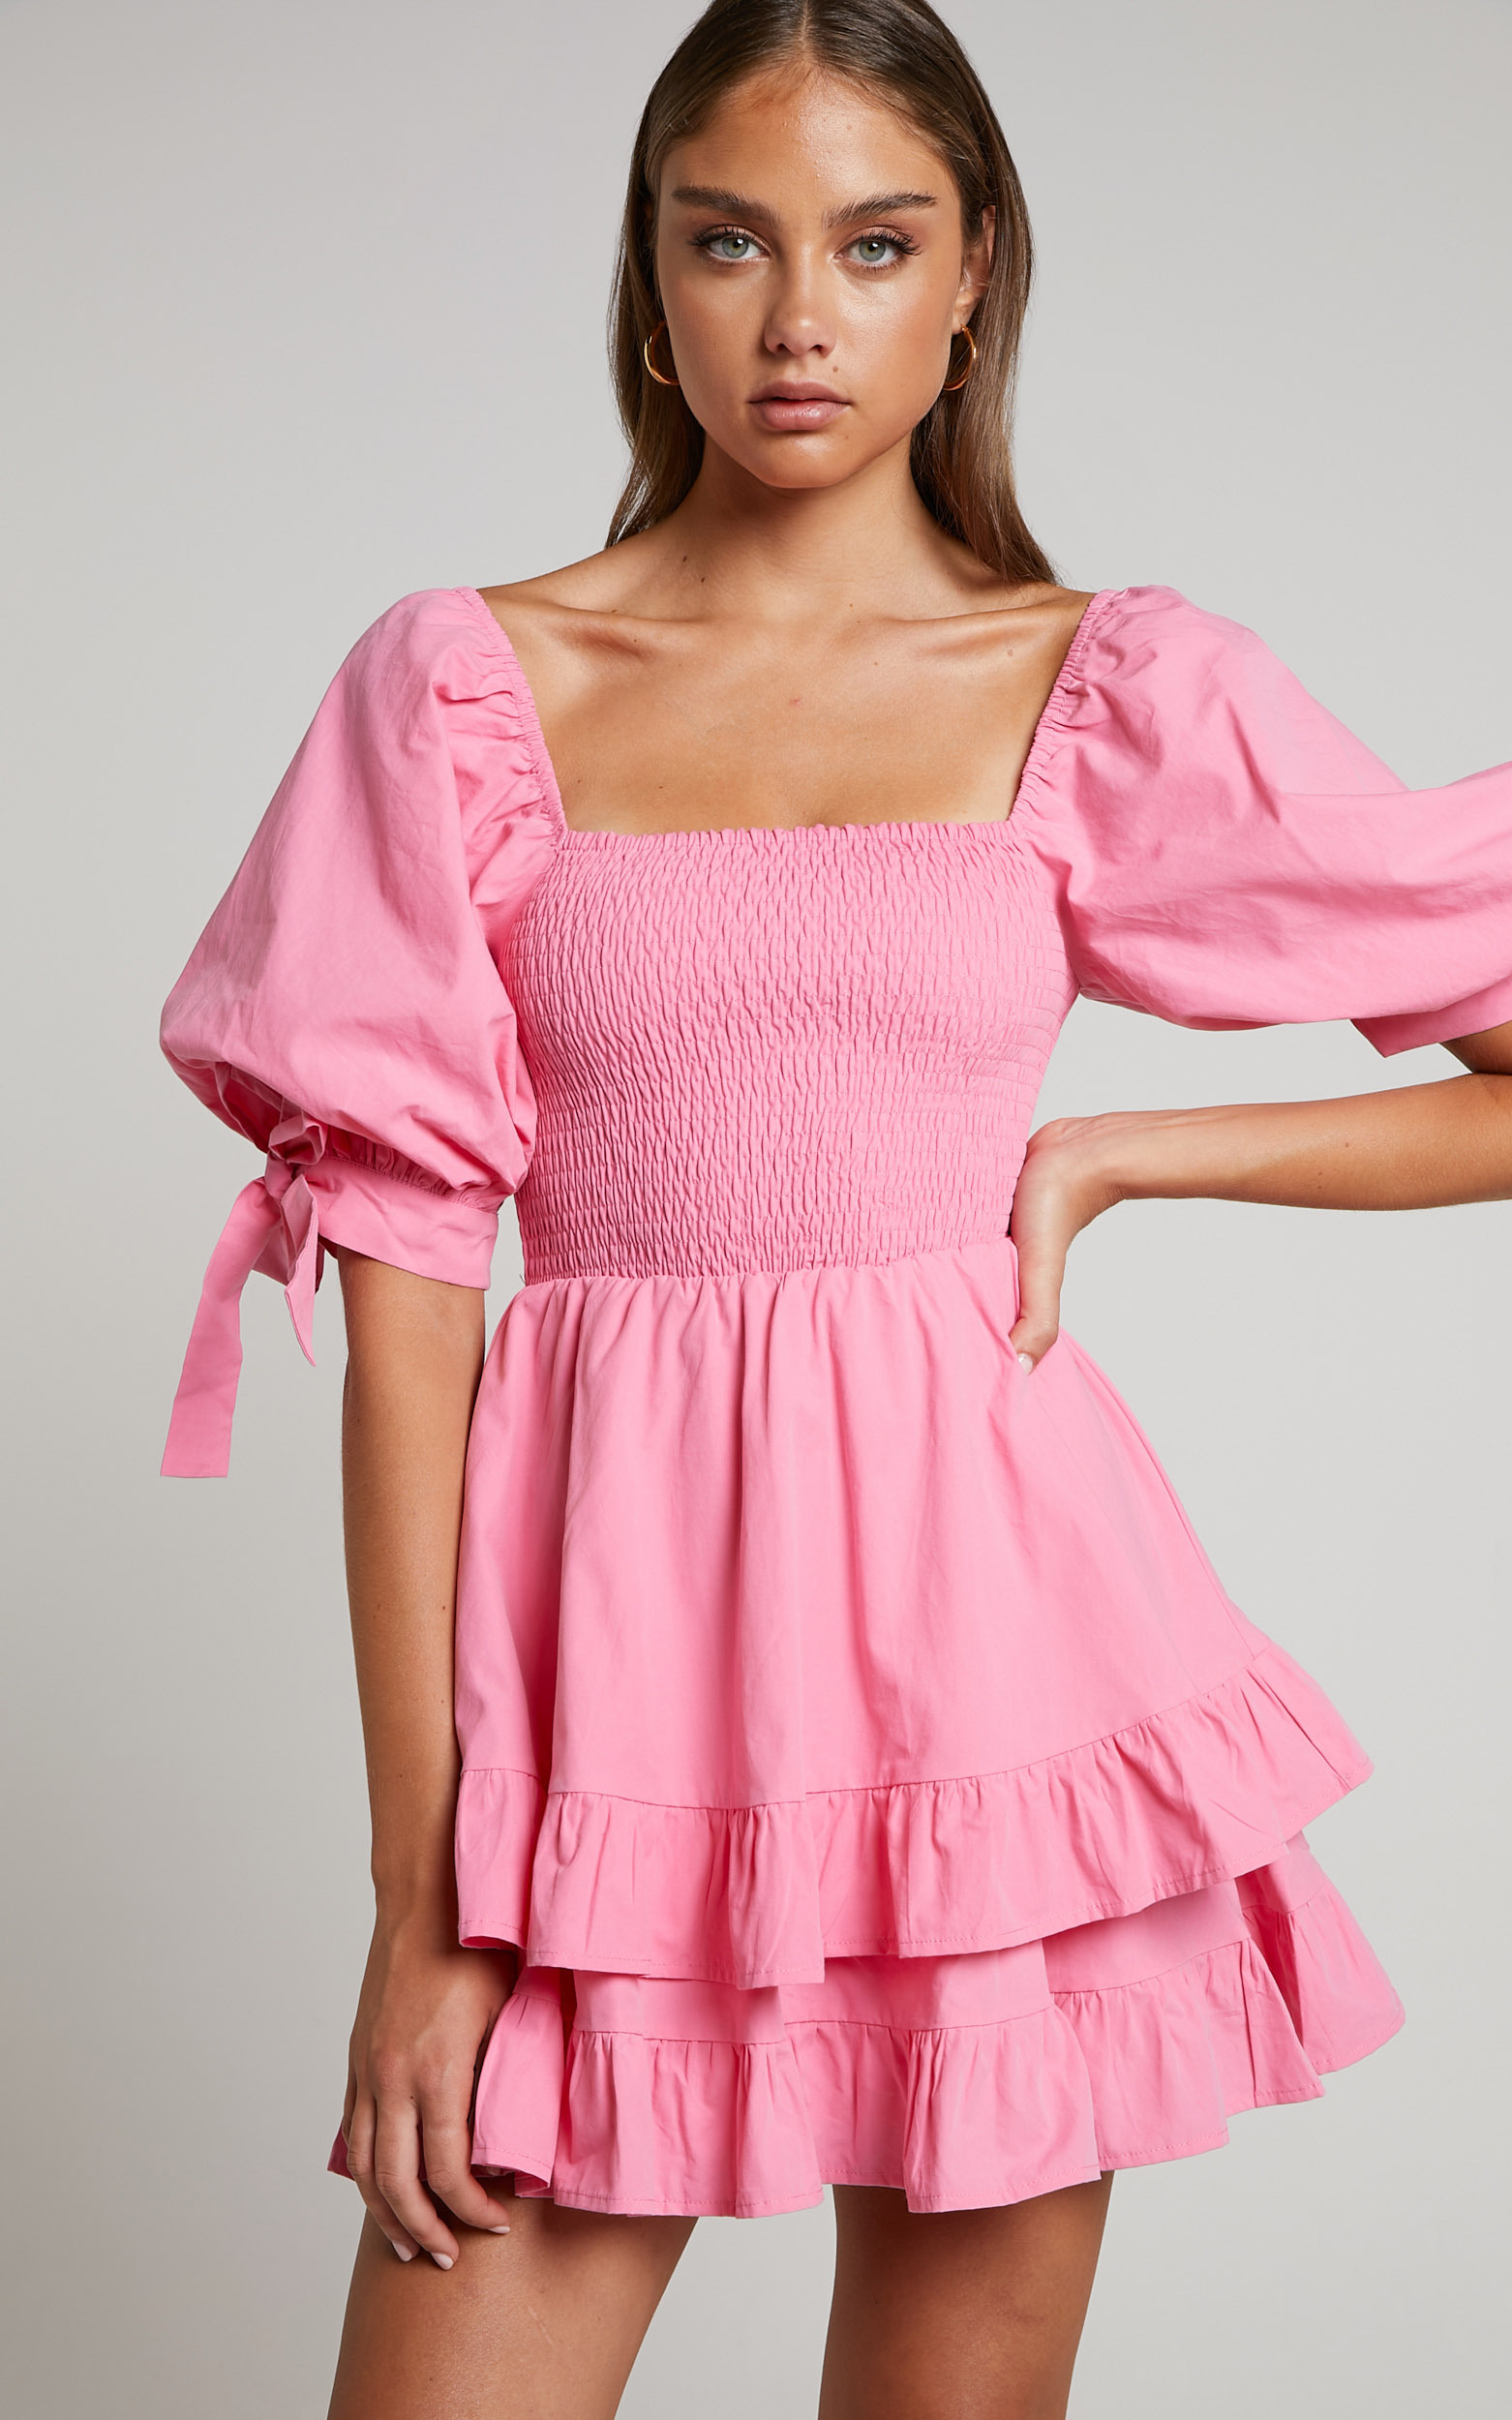 Chelle Shirred Short Tie Sleeve Mini Dress in Pink - 04, PNK2, hi-res image number null